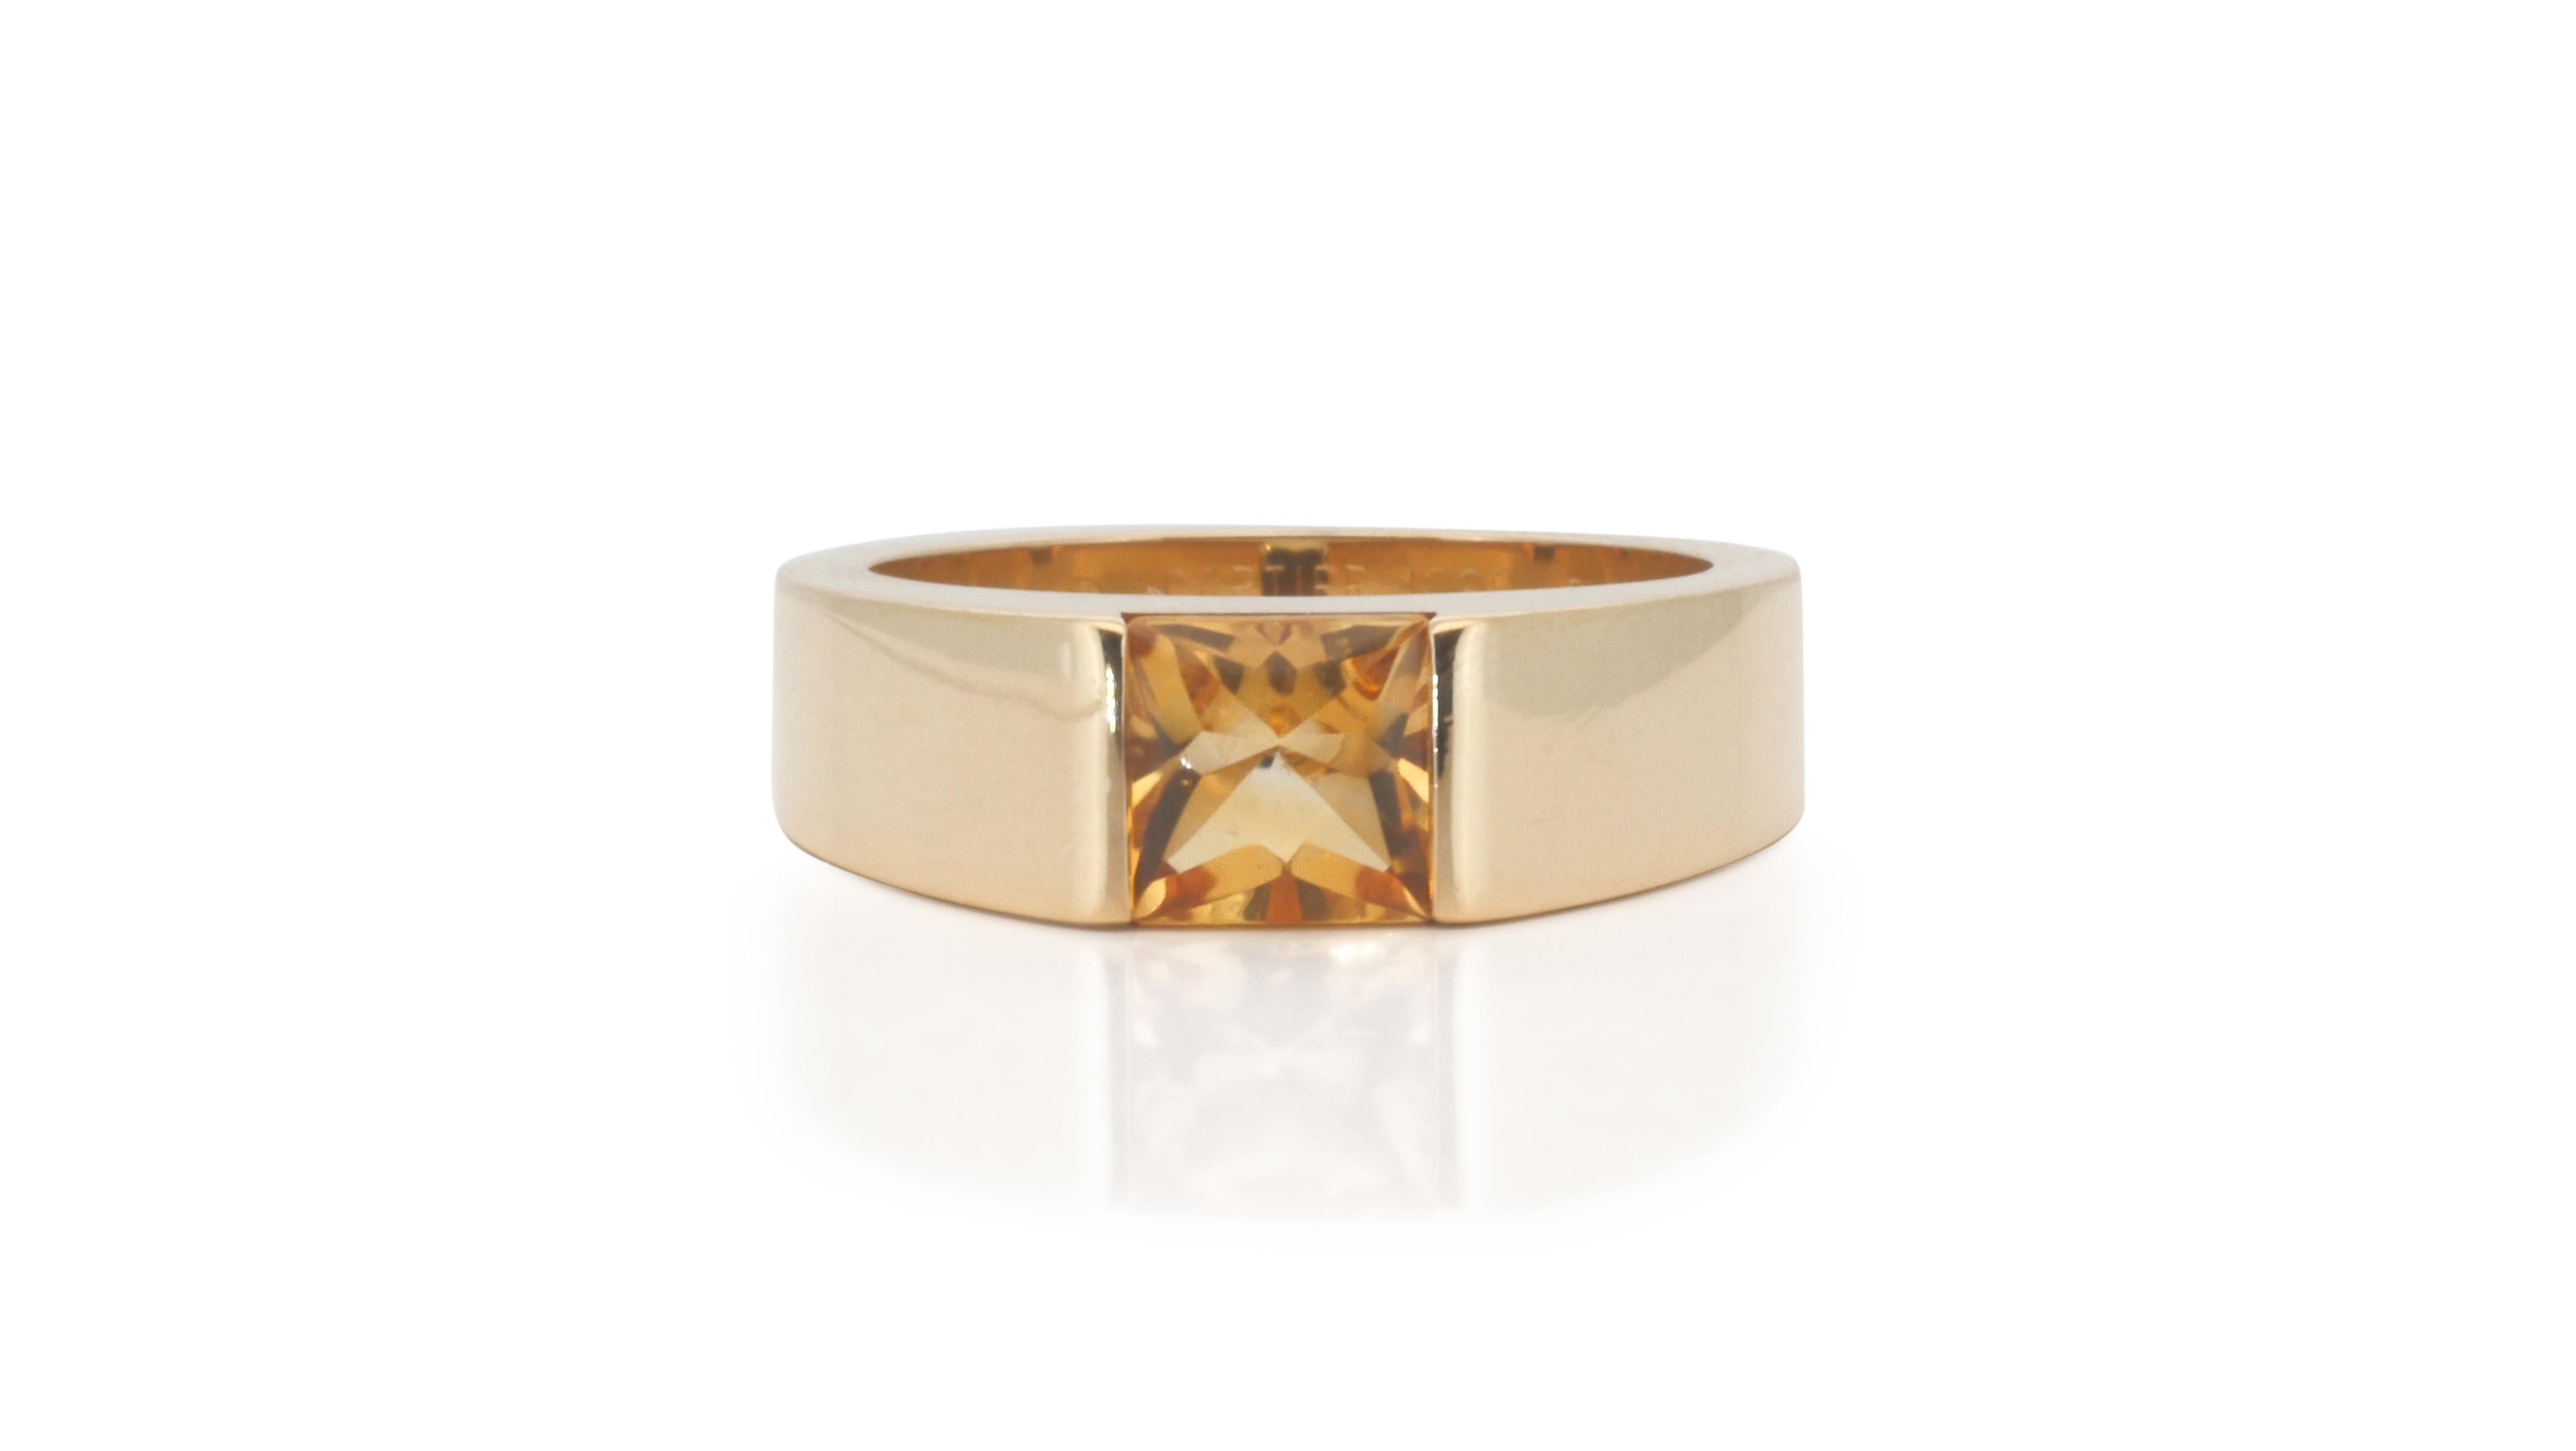 A sophisticated classic cartier ring with a dazzling 1.5 carat princess citrine. The jewelry is made of 18k yellow gold with a high-quality polish. It comes with a fancy jewelry box.

Product Details:

Metal: 18K Yellow Gold

Main Stone: 1 pc